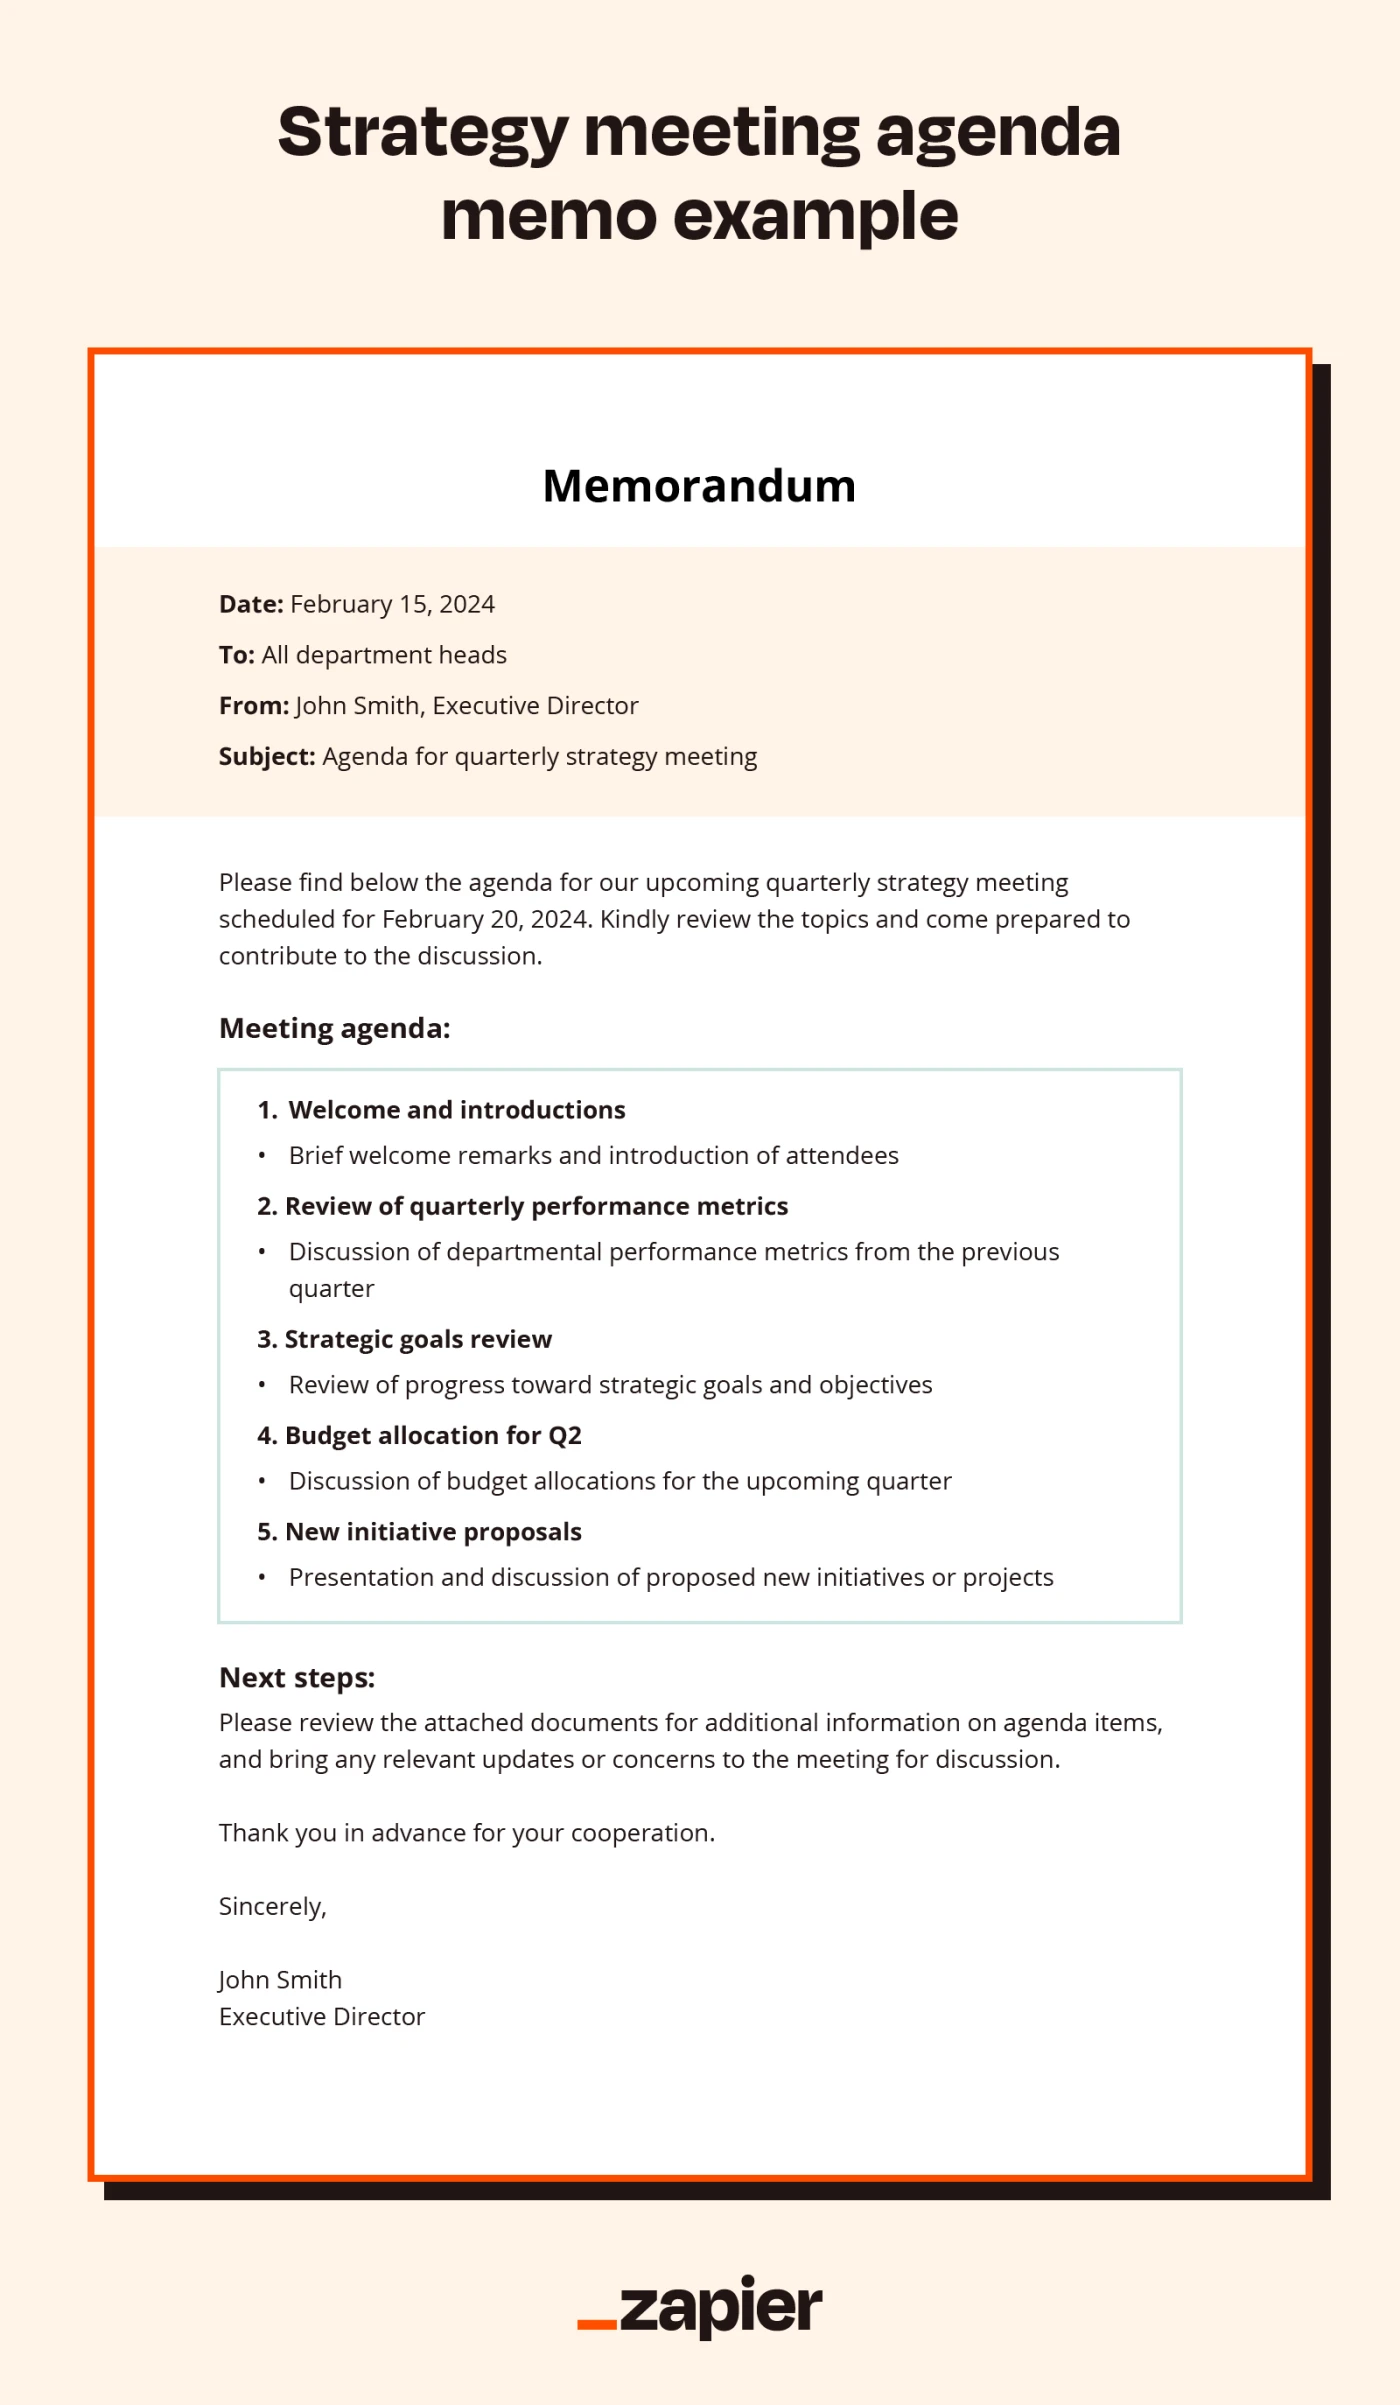 Illustrated example of a strategy meeting agenda memo on a light peach background